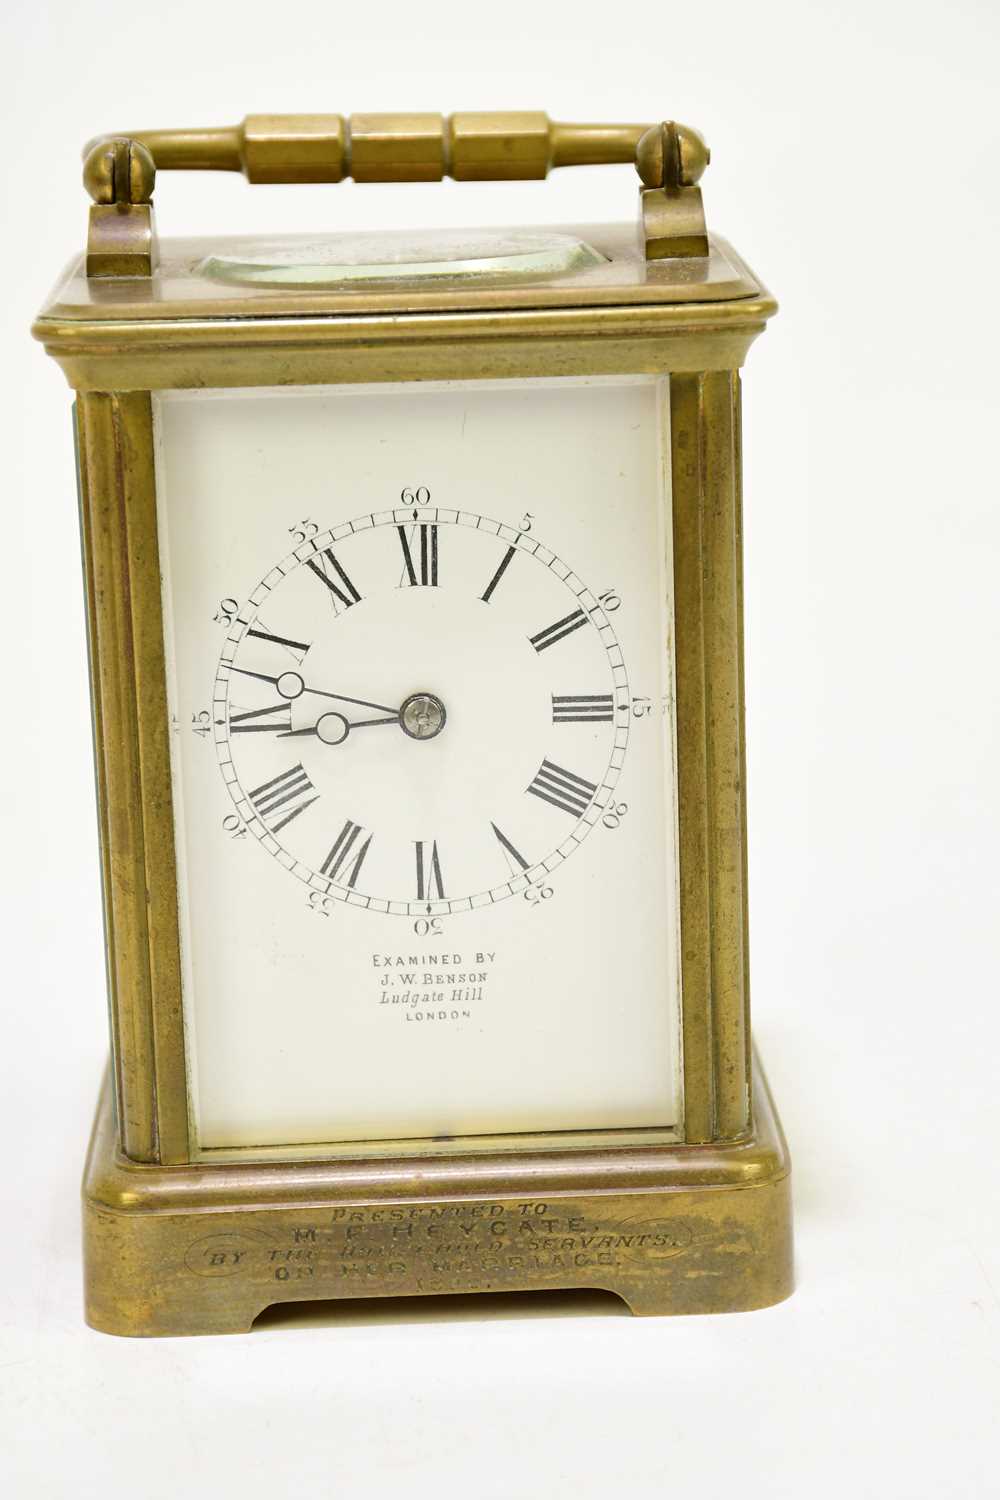 J.W. BENSON, LUDGATE HILL LONDON; a 19th century carriage clock with swing handle, the enamelled - Image 2 of 5